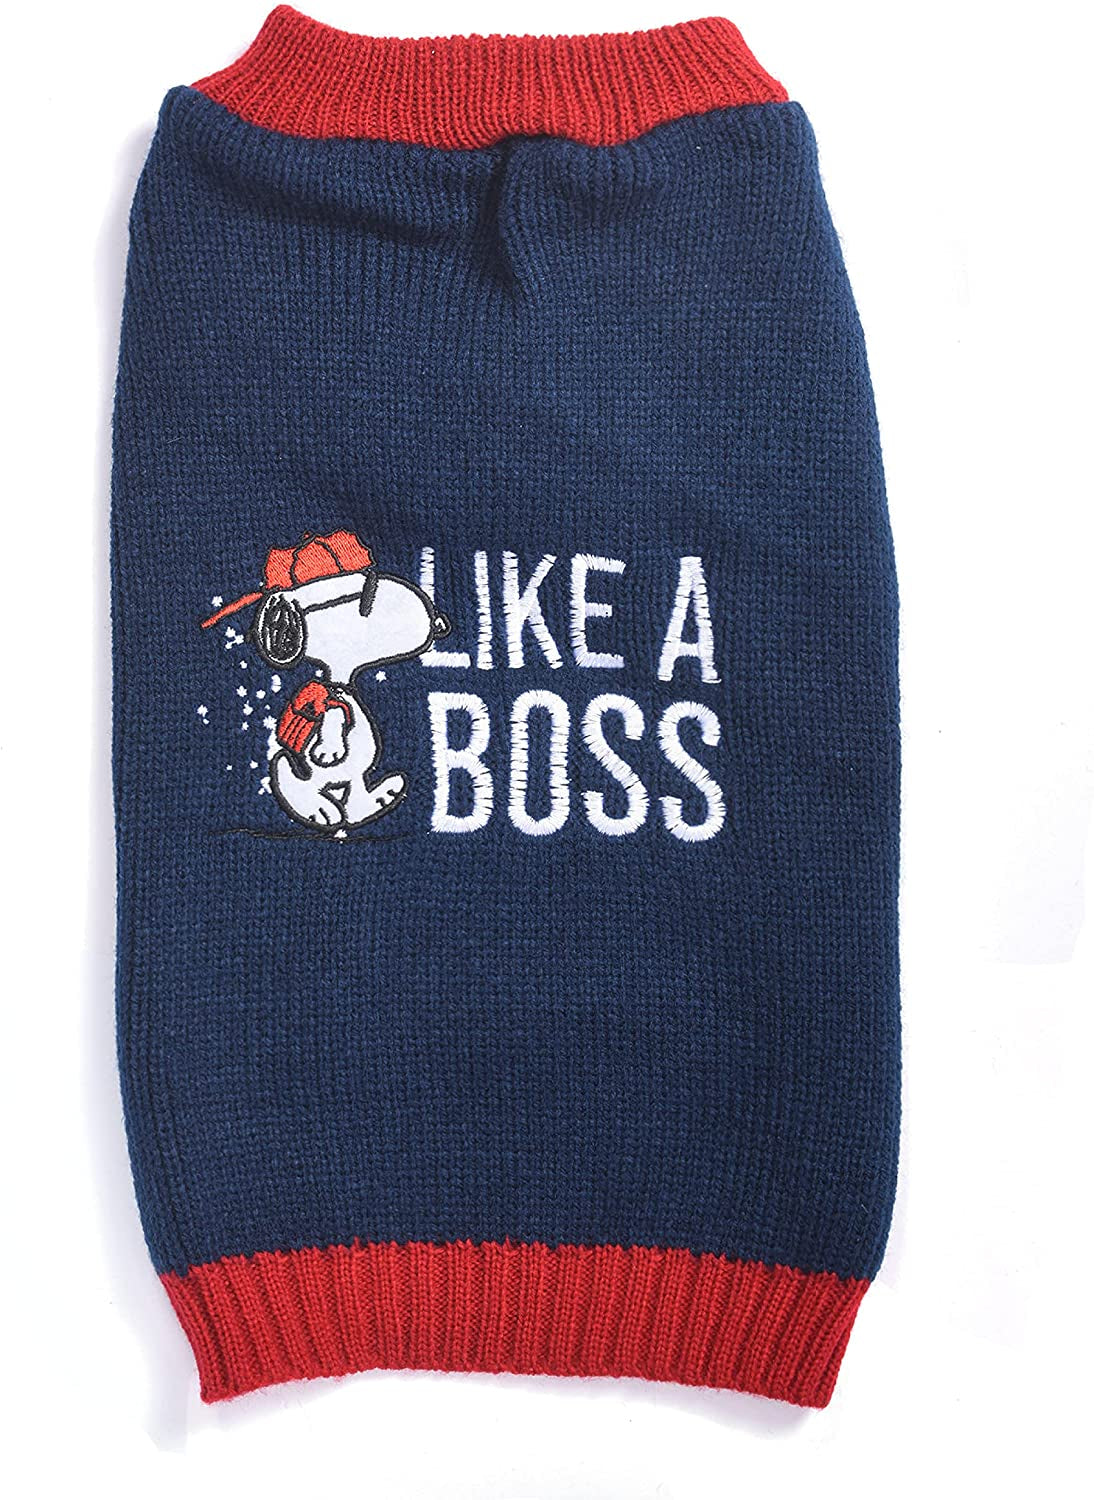 Peanuts for Pets Snoopy "Like a Boss" Dog Sweater, Medium | Soft and Comfortable Dog Apparel Dog Clothing Dog Shirt | Peanuts Snoopy Medium Dog Sweater, Medium Dog Shirt for Medium Dogs Animals & Pet Supplies > Pet Supplies > Dog Supplies > Dog Apparel Fetch for Pets Navy Small 